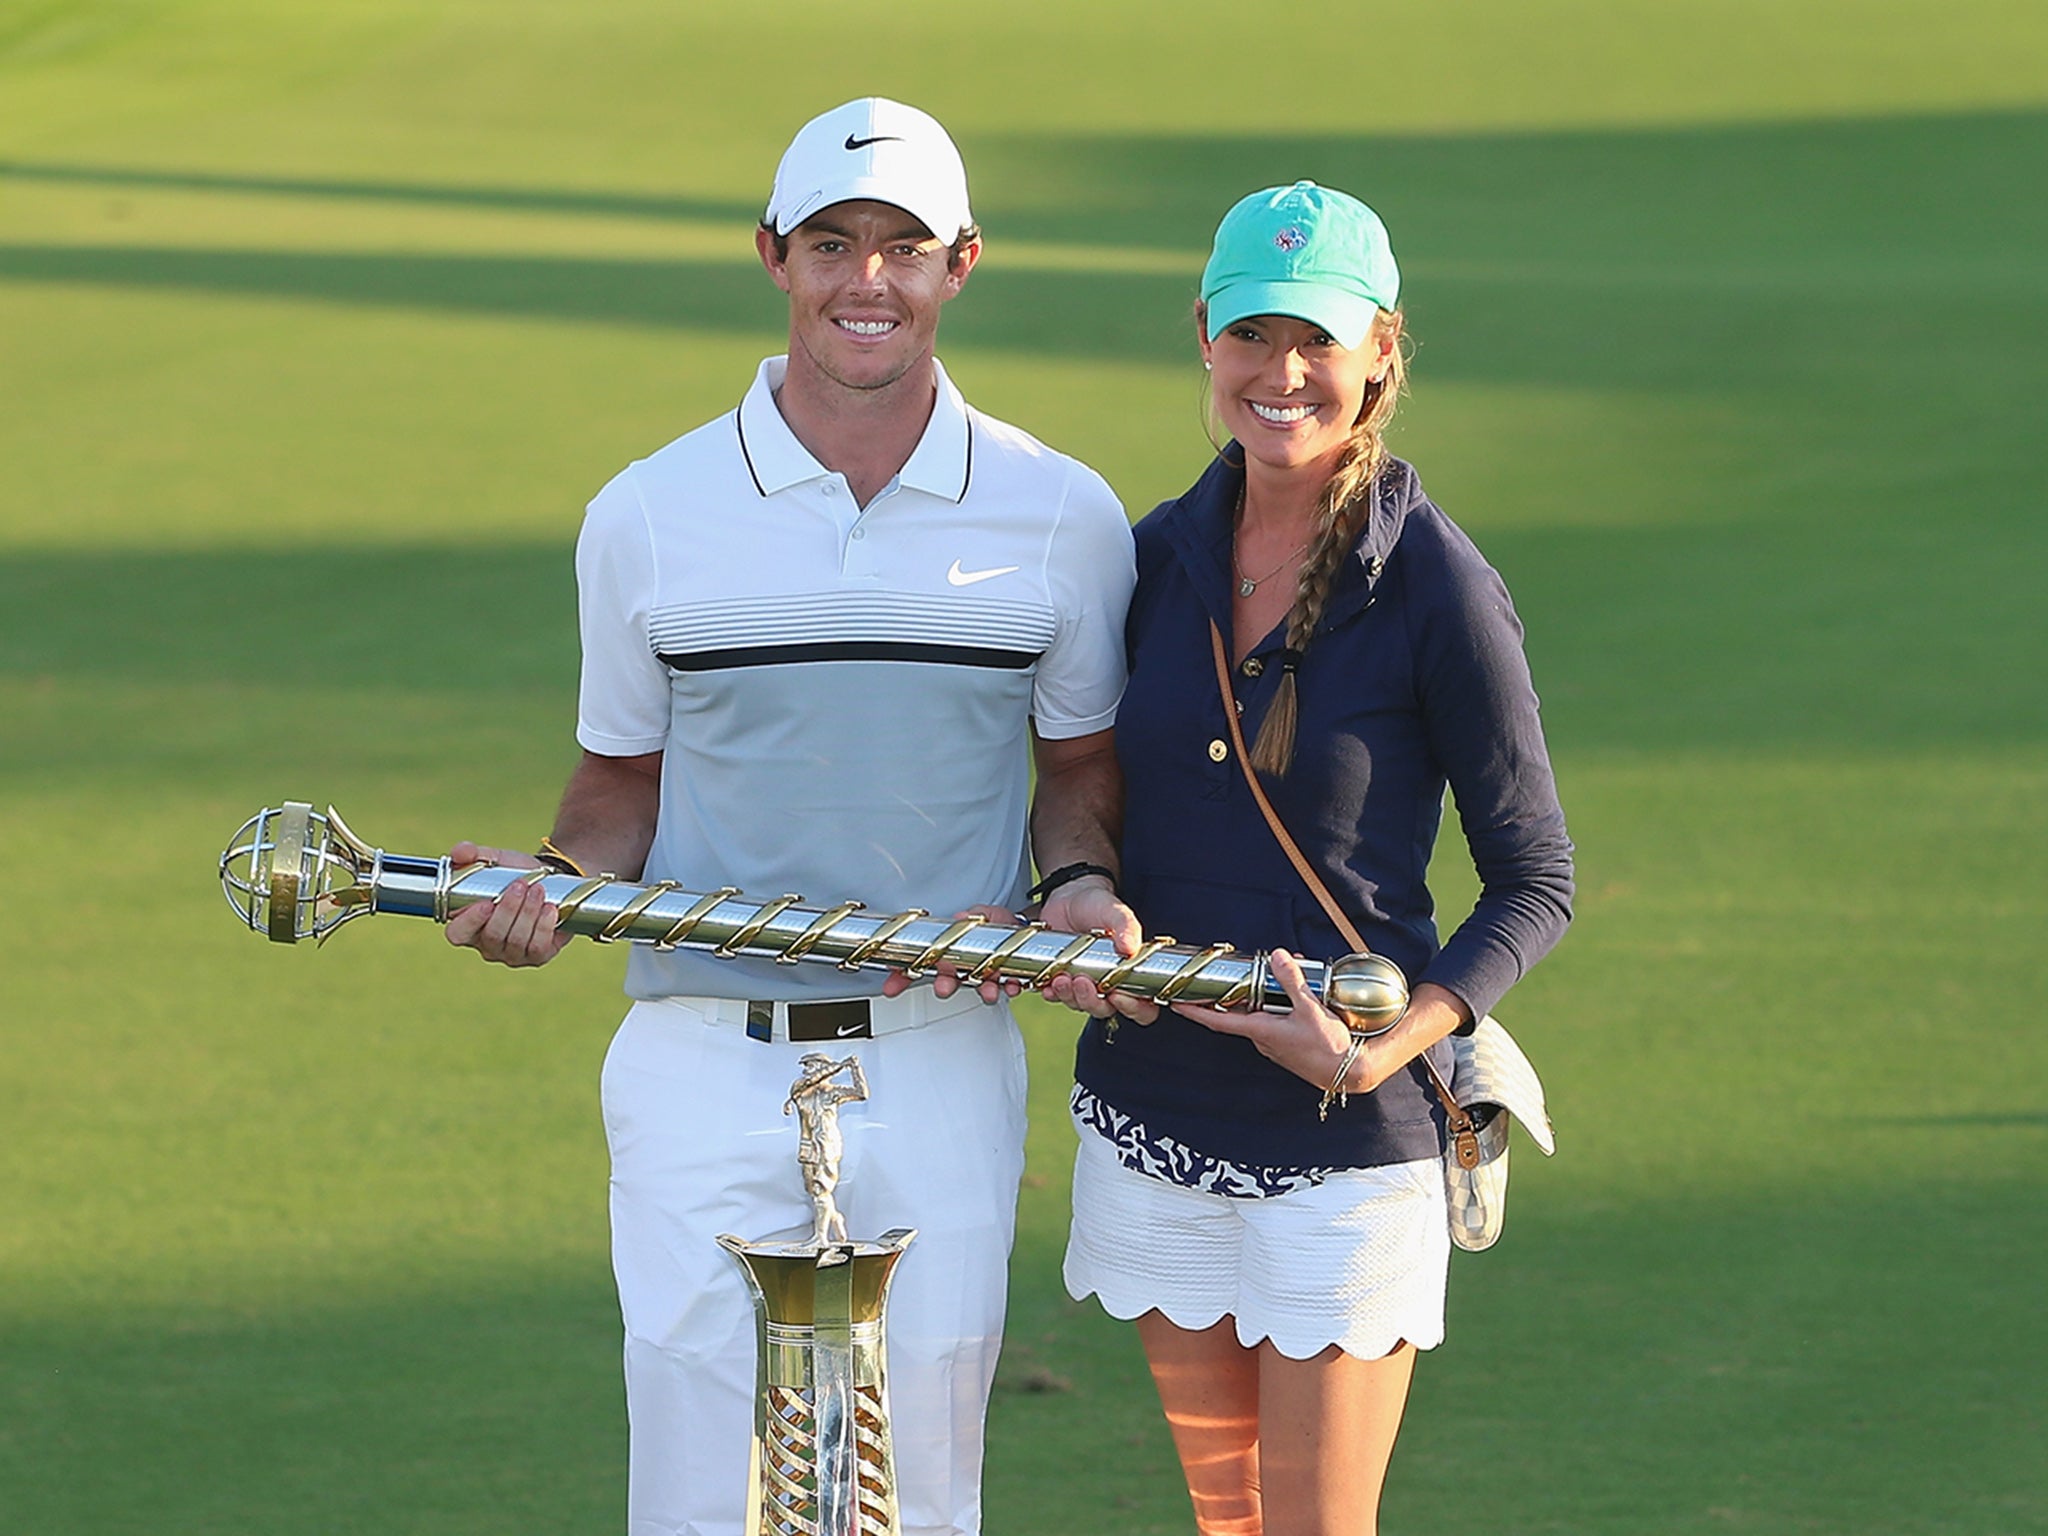 Rory McIlroy celebrates with girlfriend Erica Stoll